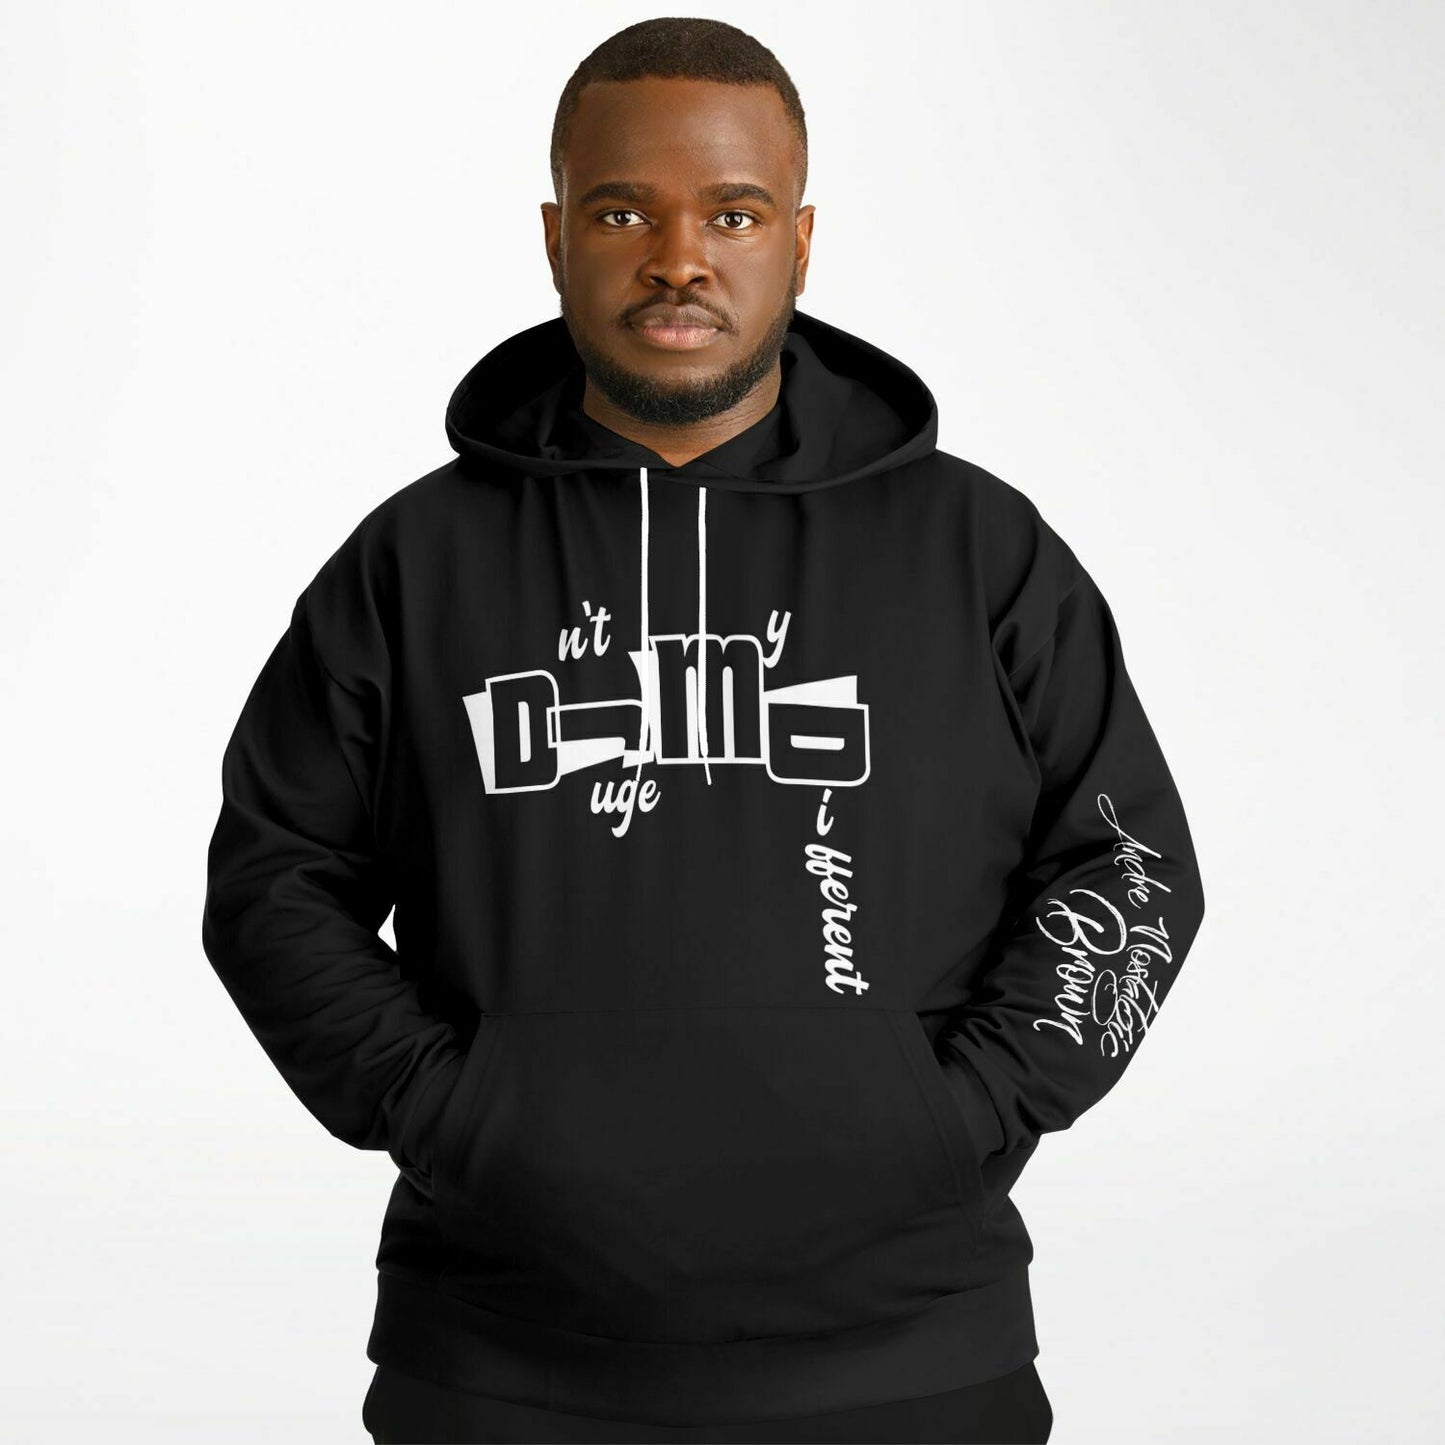 Dn't Juge My Different Fashion Plus-size Hoodie - AOP